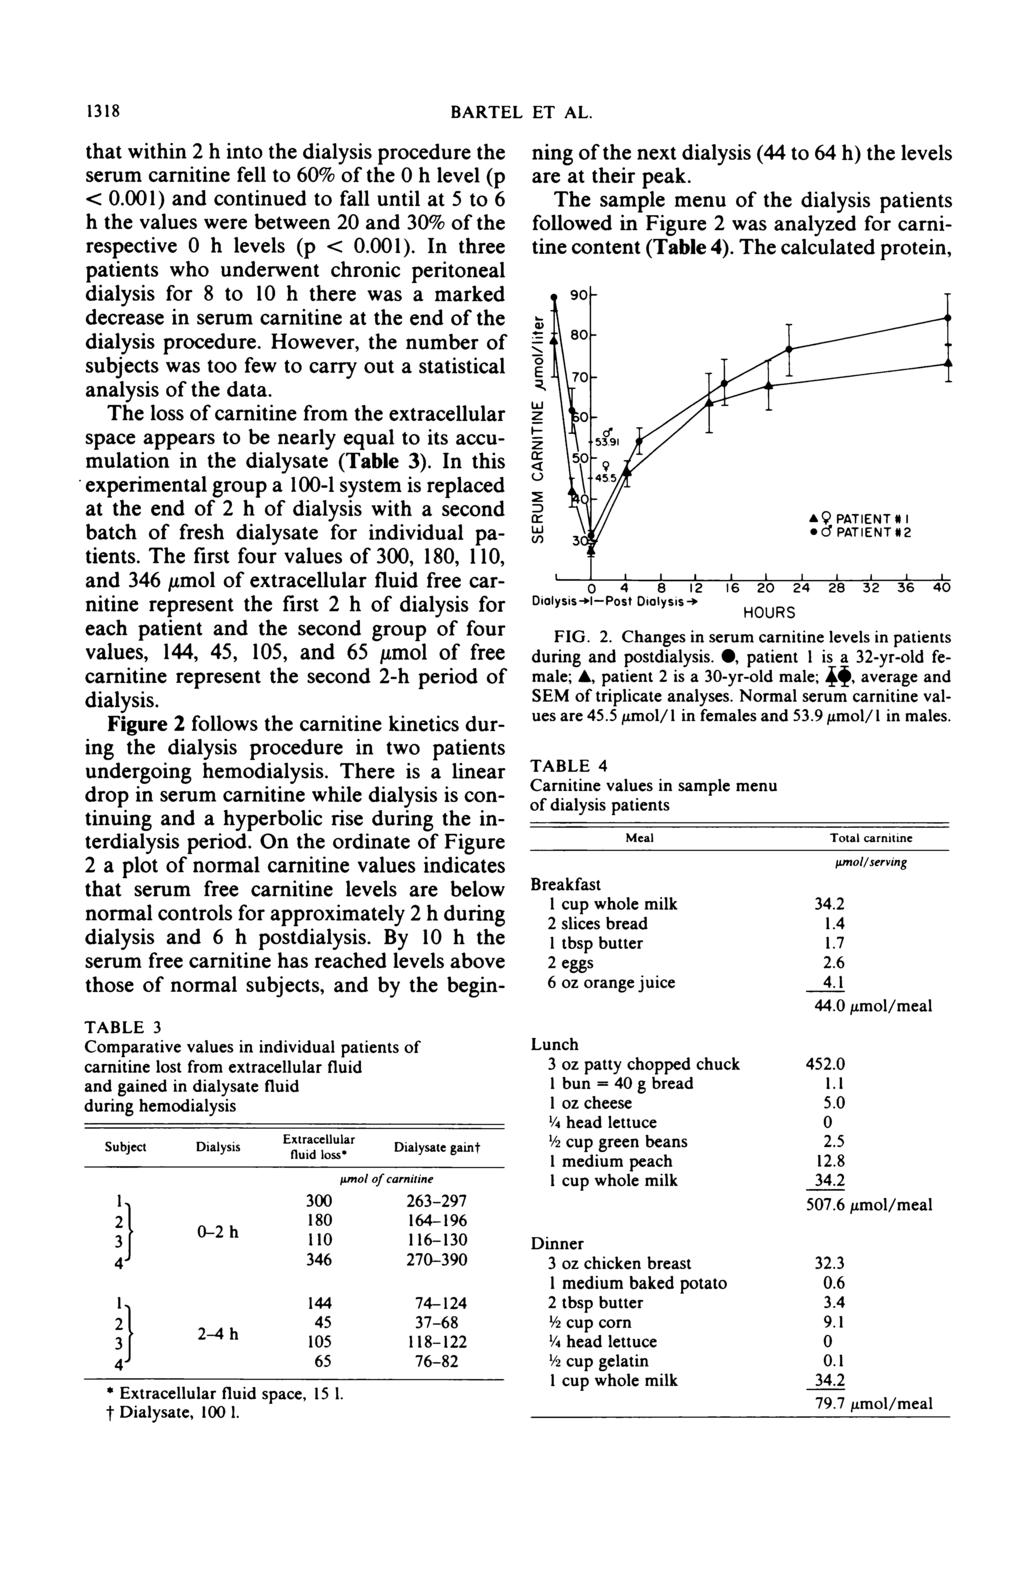 1318 BARTEL ET AL. that ithin 2 h into the dialysis procedure the serum carnitine fell to 60% of the 0 h level (p < 0.